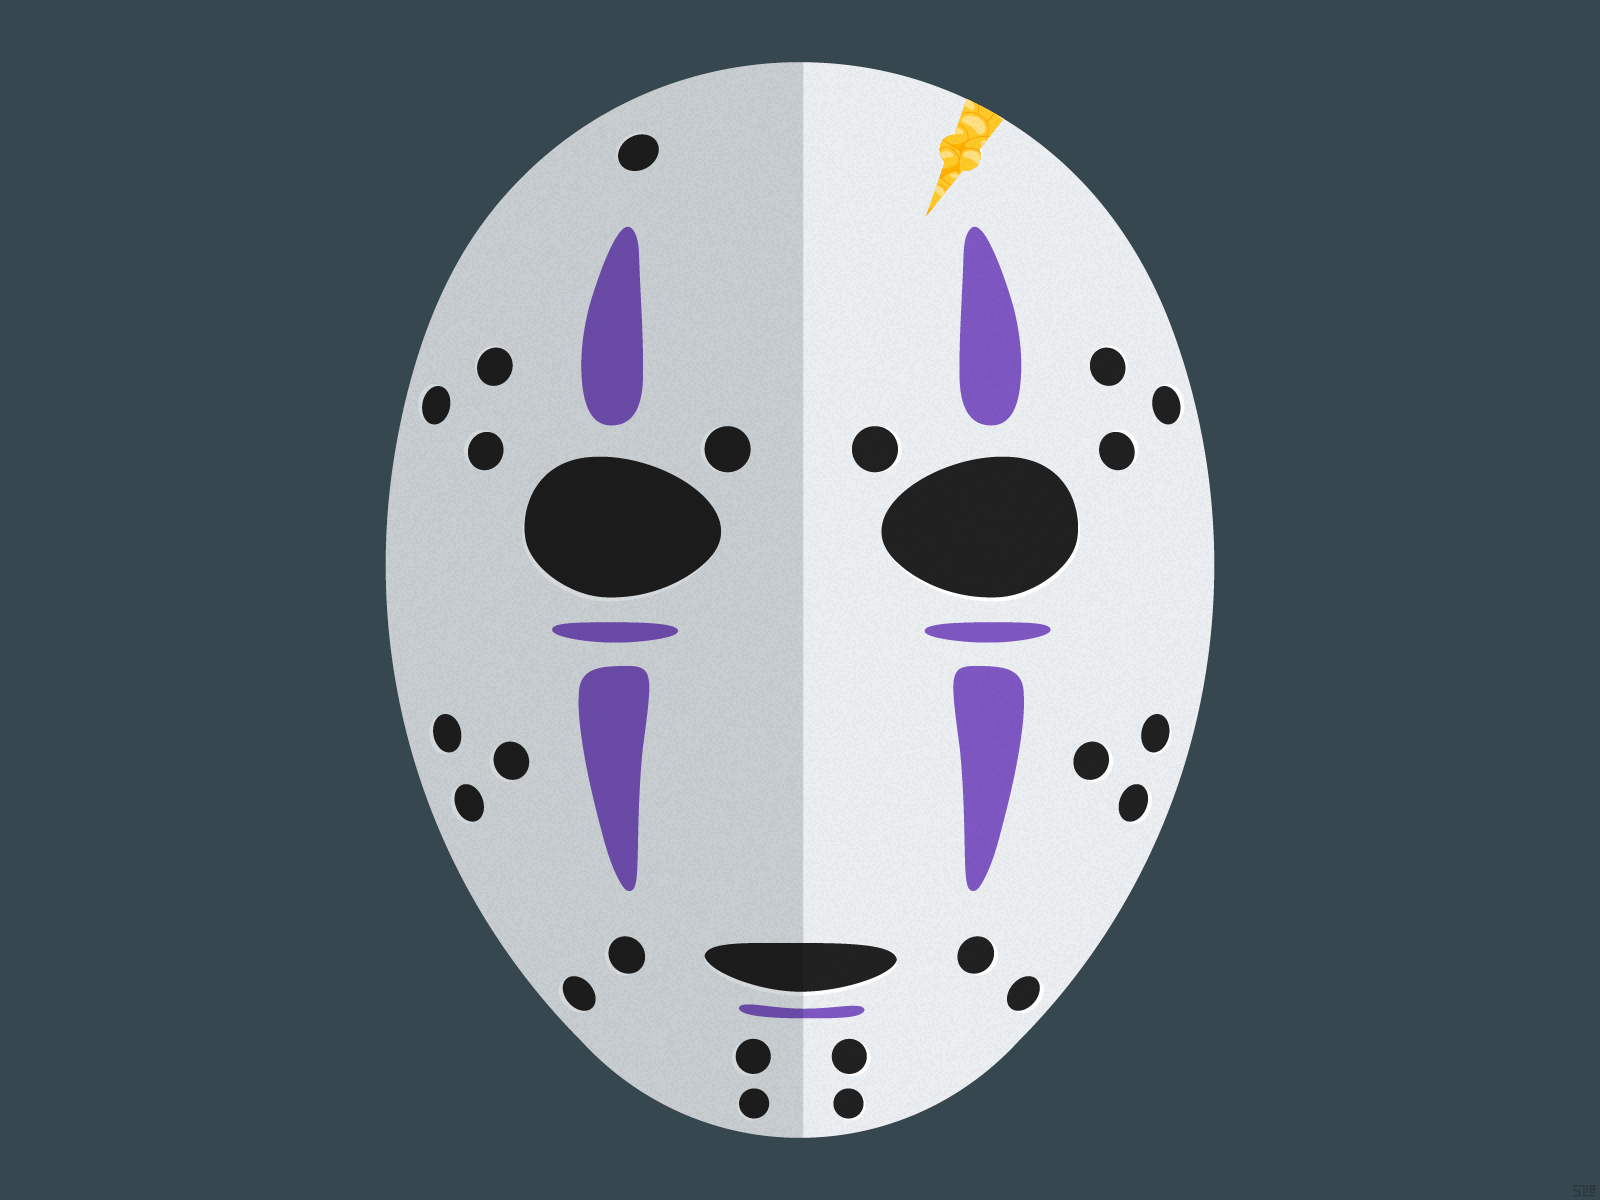 image of a hockey mask with purple stripes and a crack filled with gold